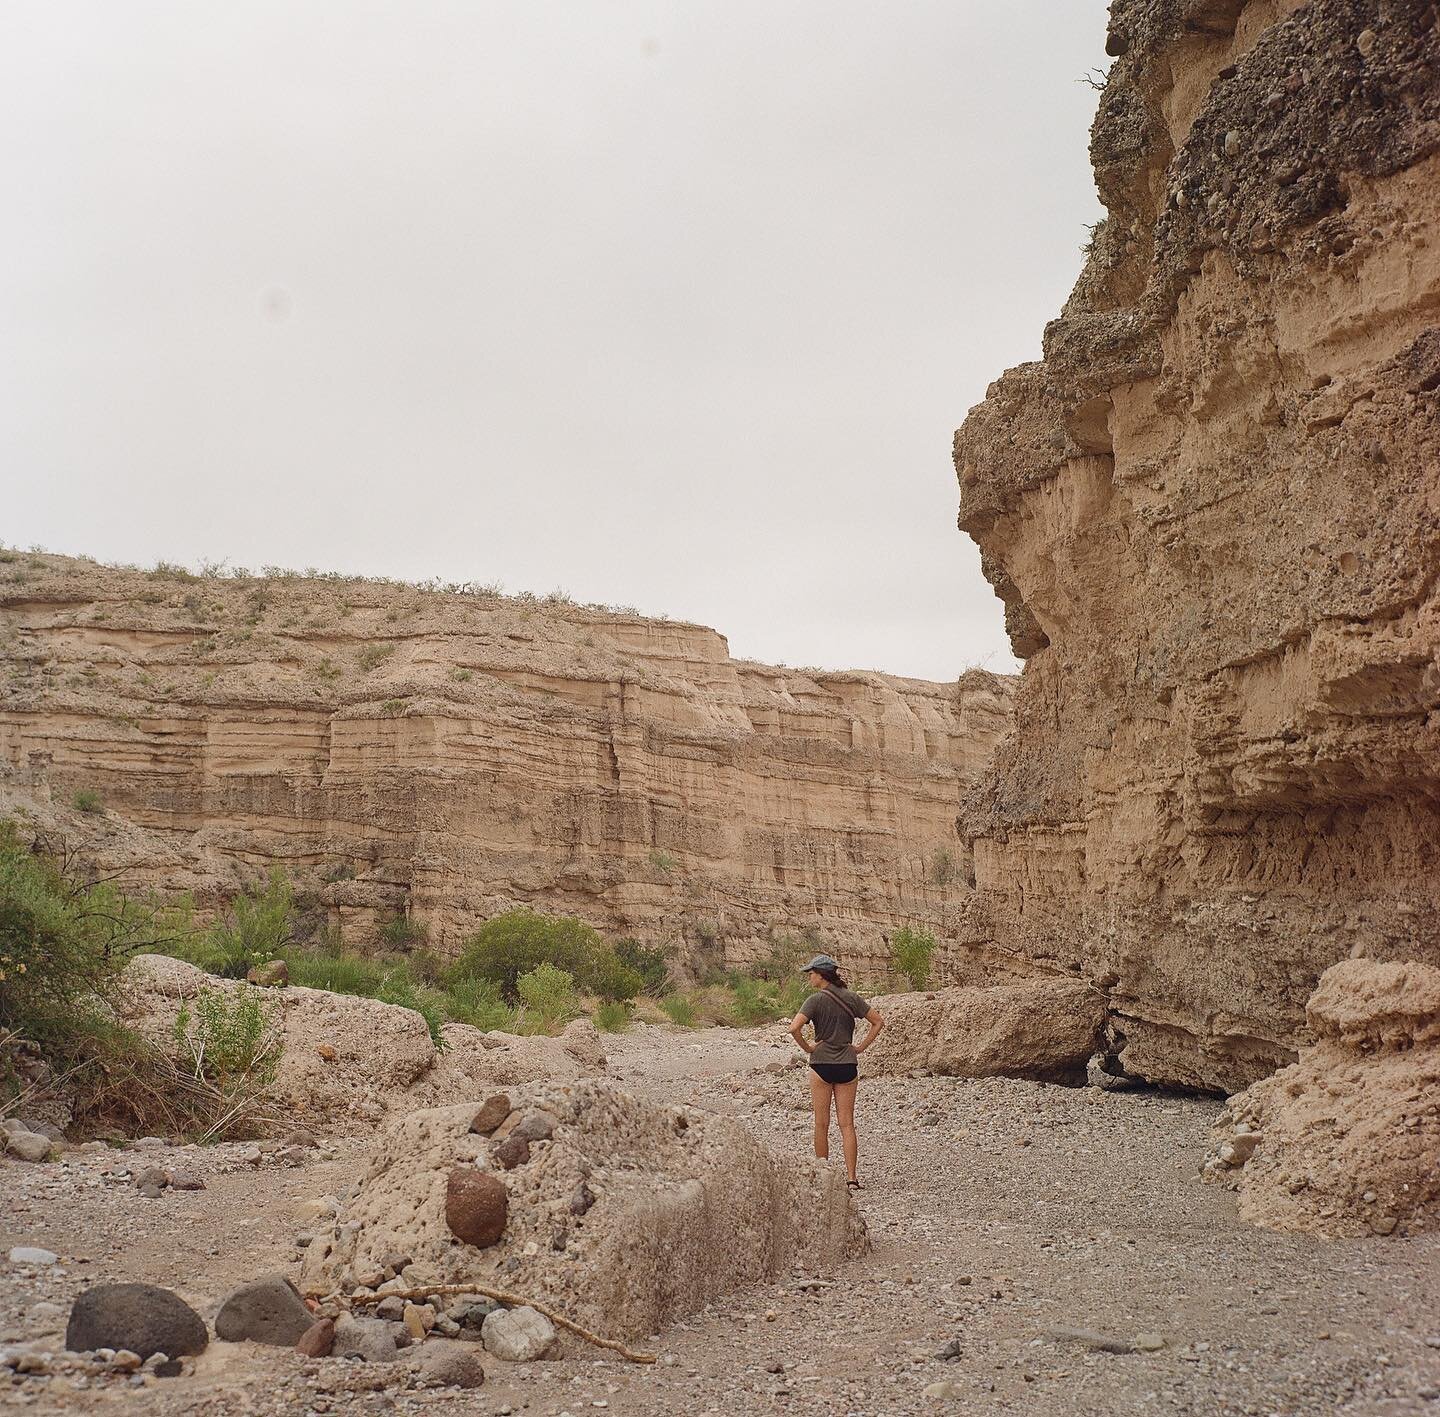 After Big Bend we took the river road to Chinati Hot Springs, soaked more, then went up Pinto Canyon Road over the hills to Marfa. Some of the widest and most remote stuff I&rsquo;ve driven I think. 
#rolleiflex 
#kodakgold200